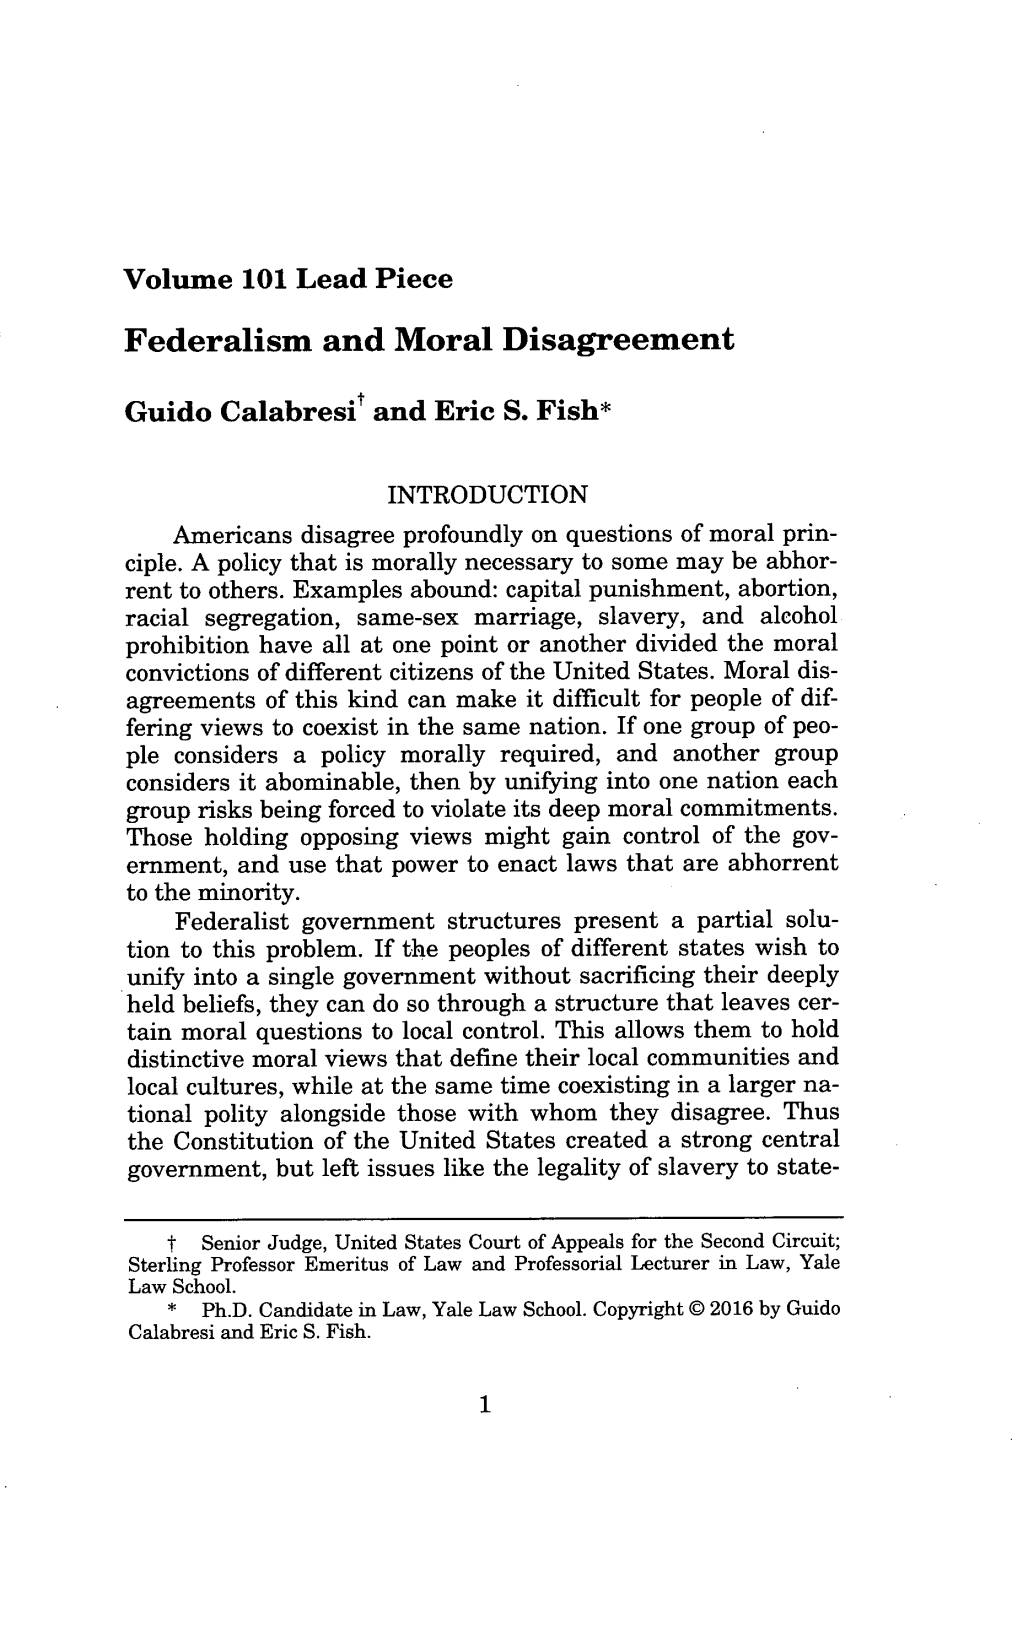 Federalism and Moral Disagreement